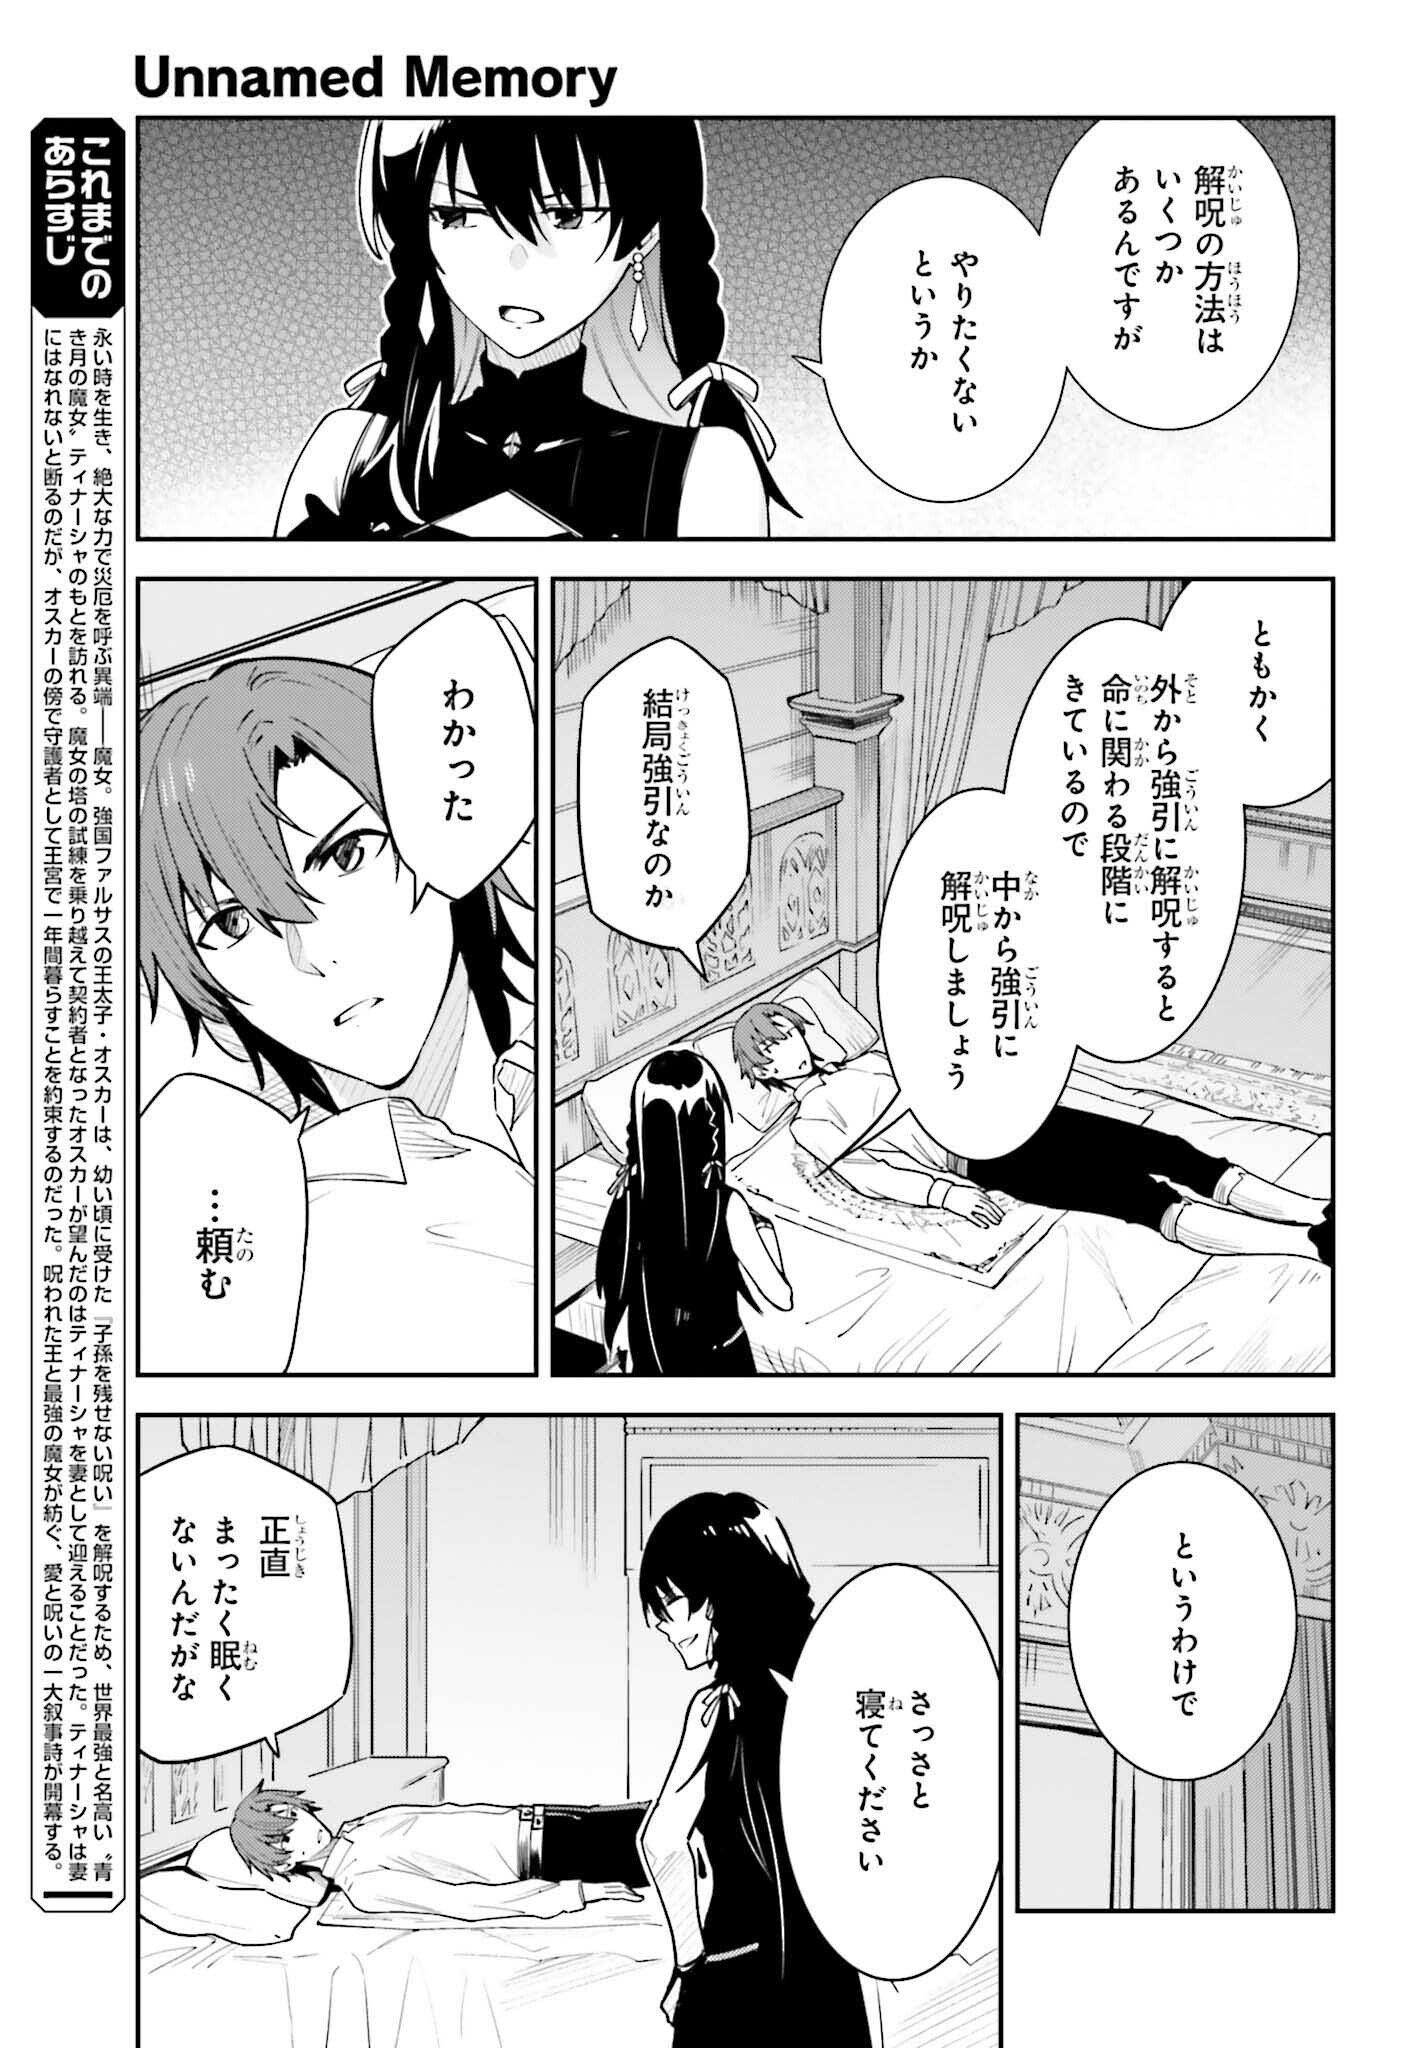 Unnamed Memory 第19話 - Page 3